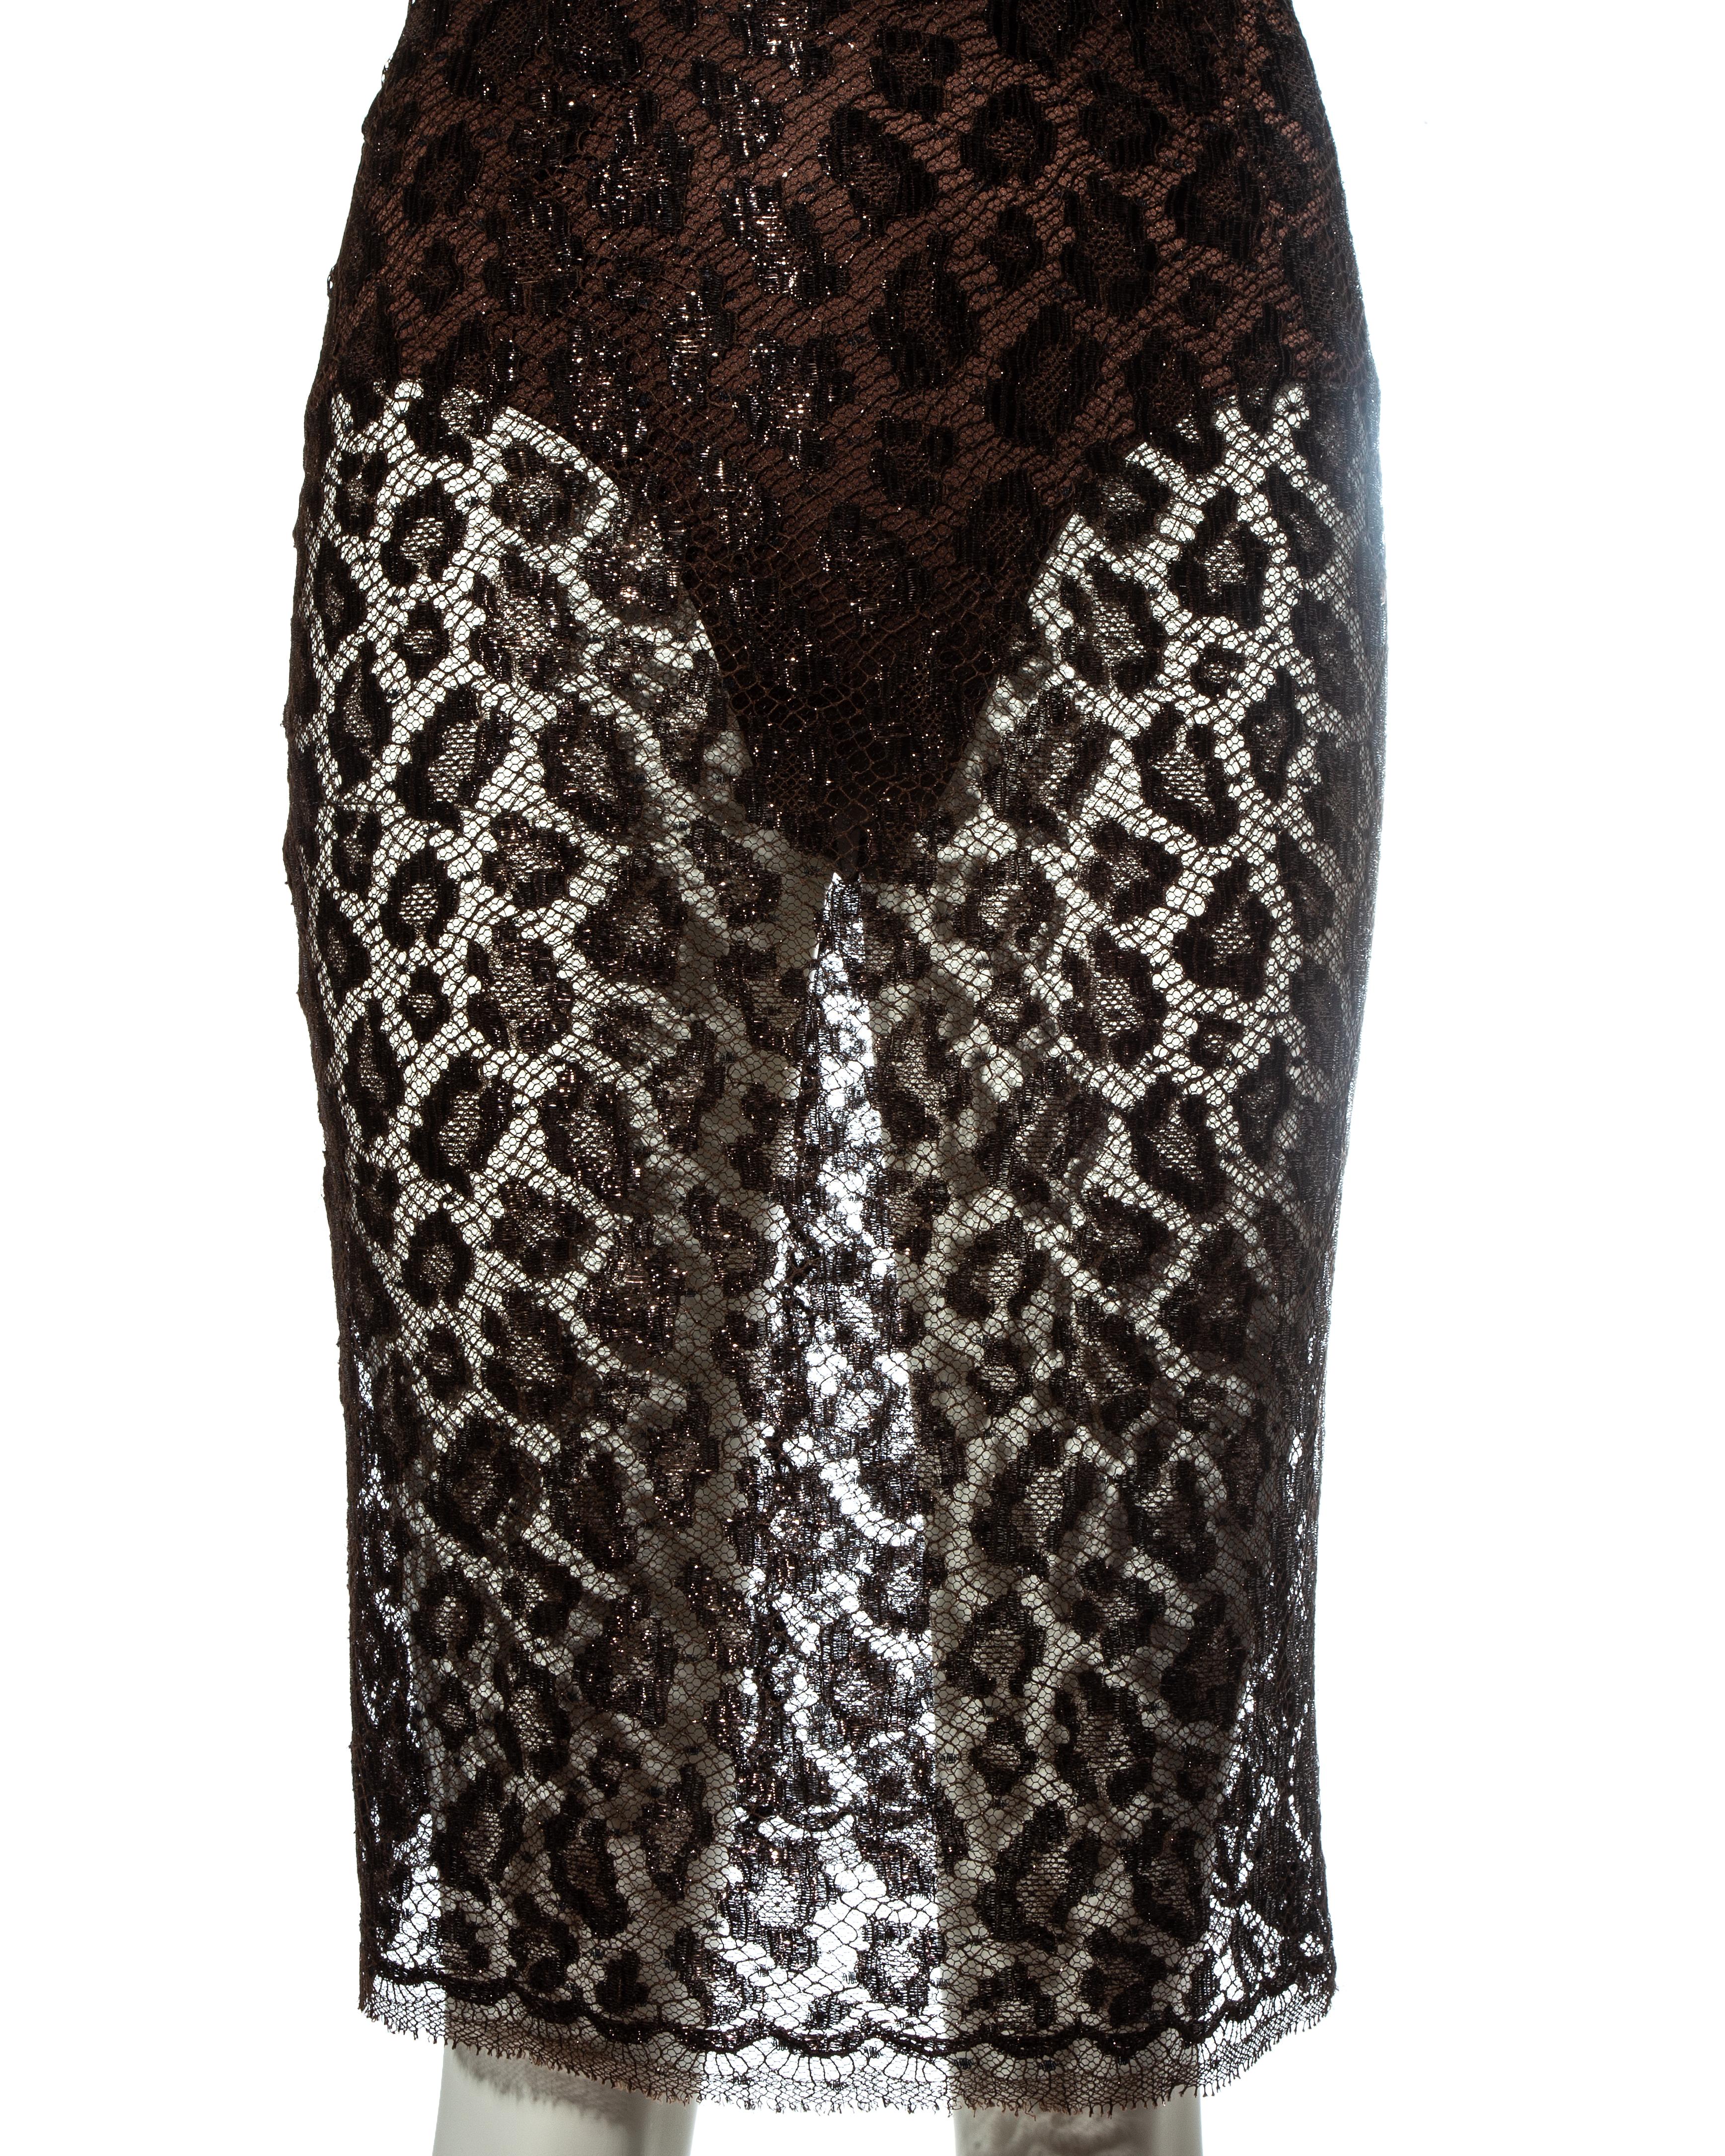 Atelier Versace brown leopard lamé lace and leather couture dress, ss 1996 In Excellent Condition For Sale In London, GB